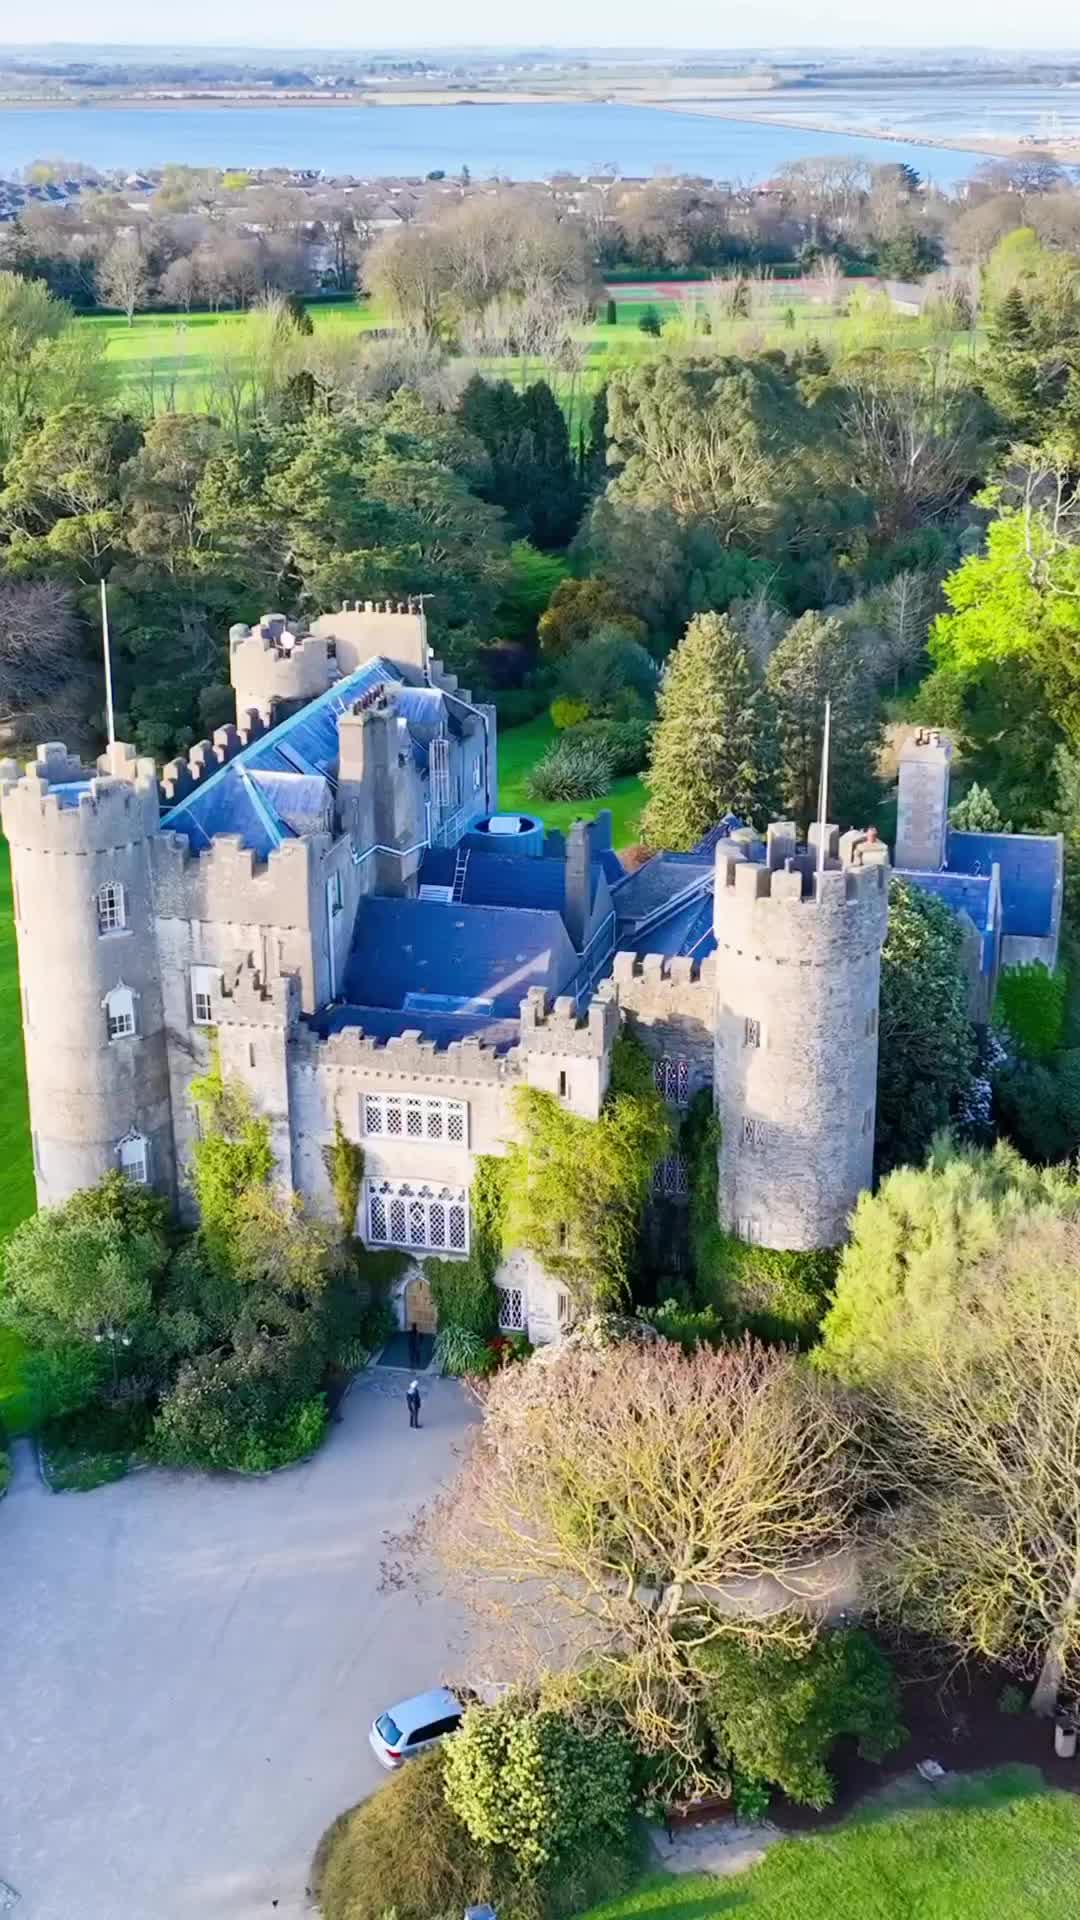 Explore the 800-Year-Old Malahide Castle in Ireland